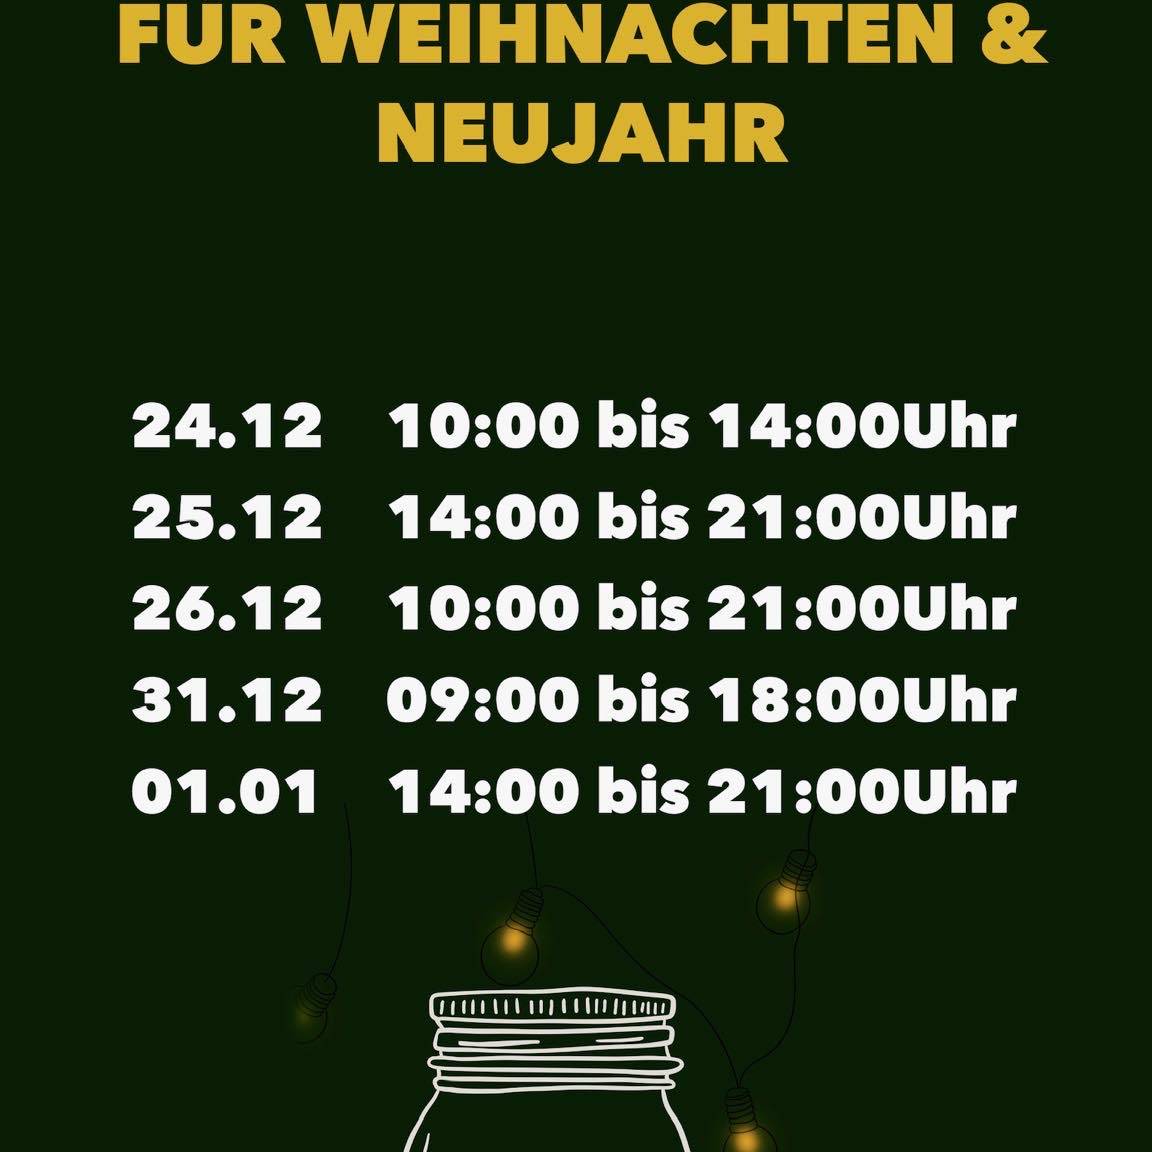 Steil Holidays. Opening hours of Boulderhalle Steil in Karlsruhe Christmas a new years eve: 24.12.: 10 am to 2 pm, 25.12.: 2 pm to 9 pm, 26.12.: 10 am to 9 pm, 31.12. 9 am to 6 pm and 01.01.: 2 pm to 9 pm.